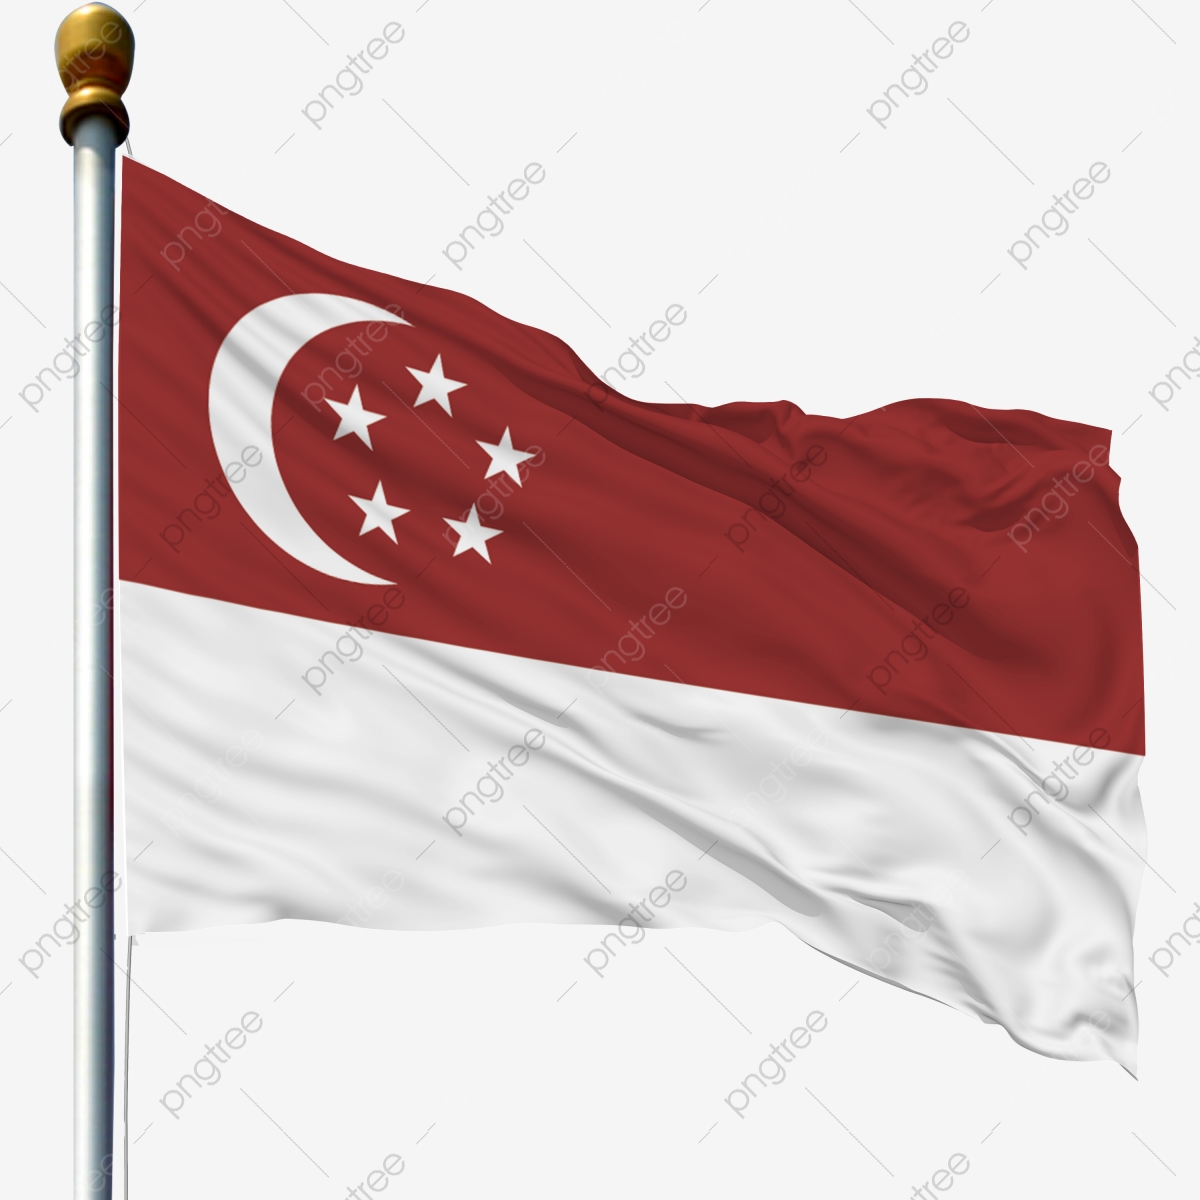 Singapore Flag, Singapore, Flag, Foreign Flag PNG and Vector.